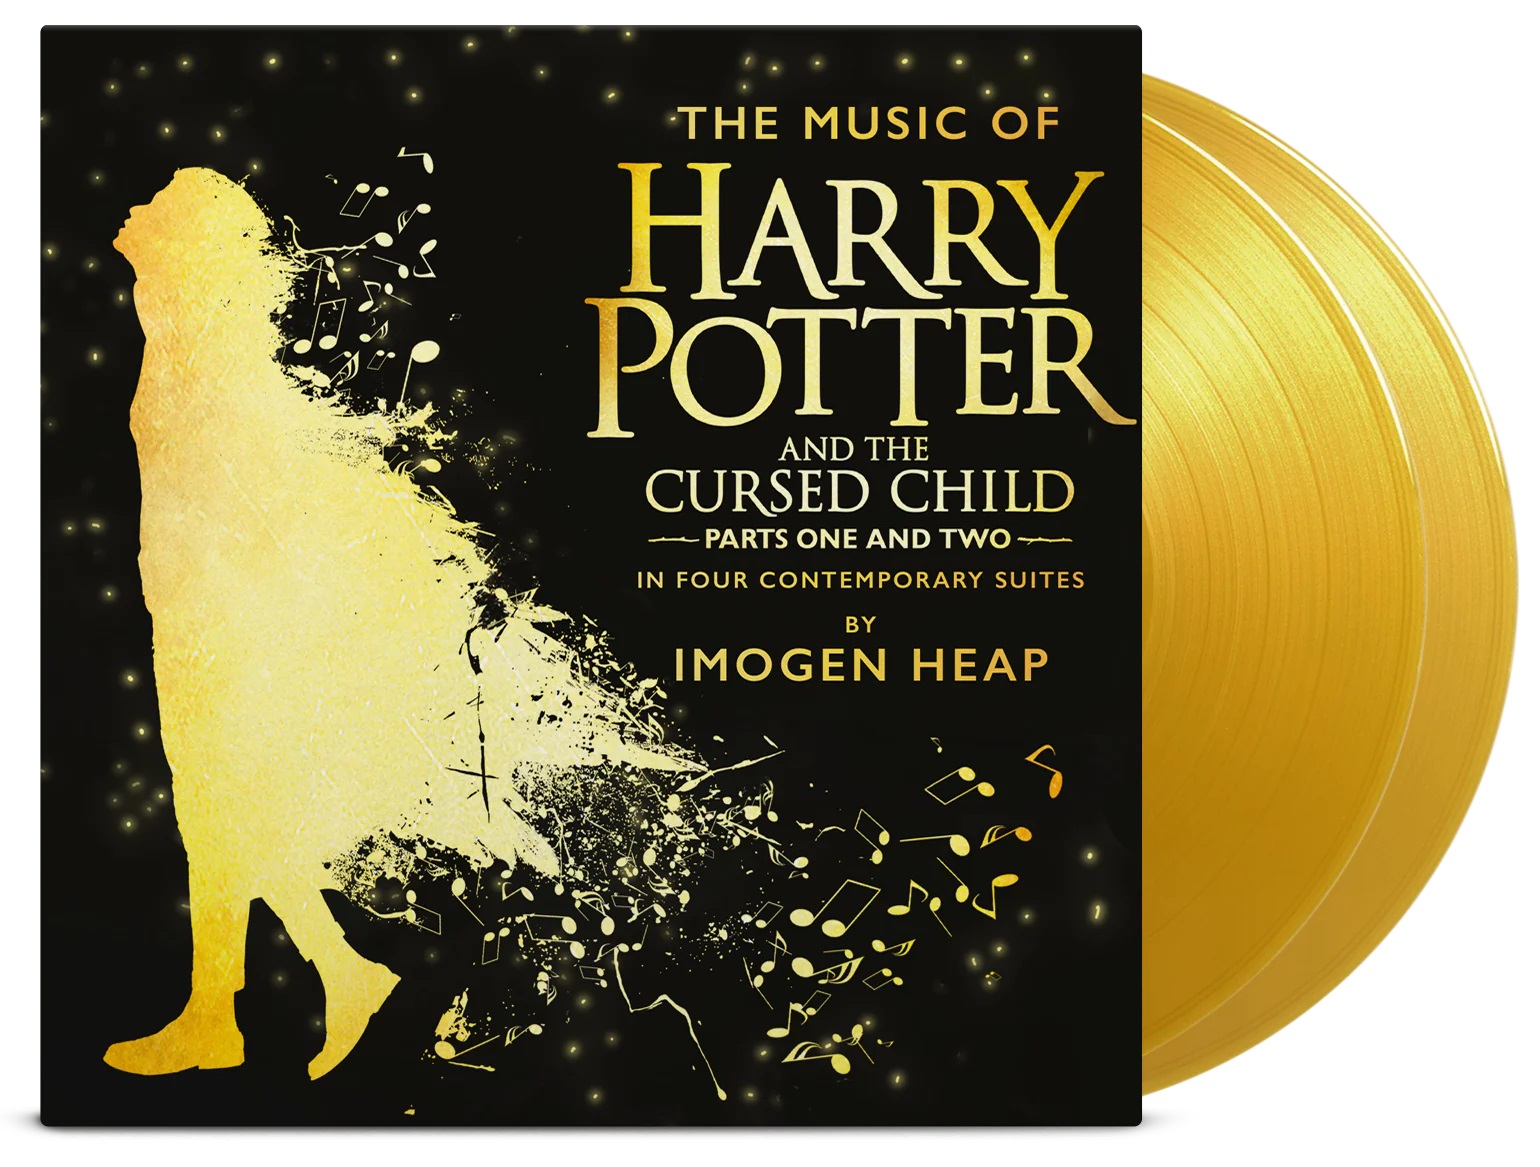 The Music Of Harry Potter And The Cursed Child Parts 1 And 2 | Édition Limitée Vinyle Translucide - EAN : 8719262032637